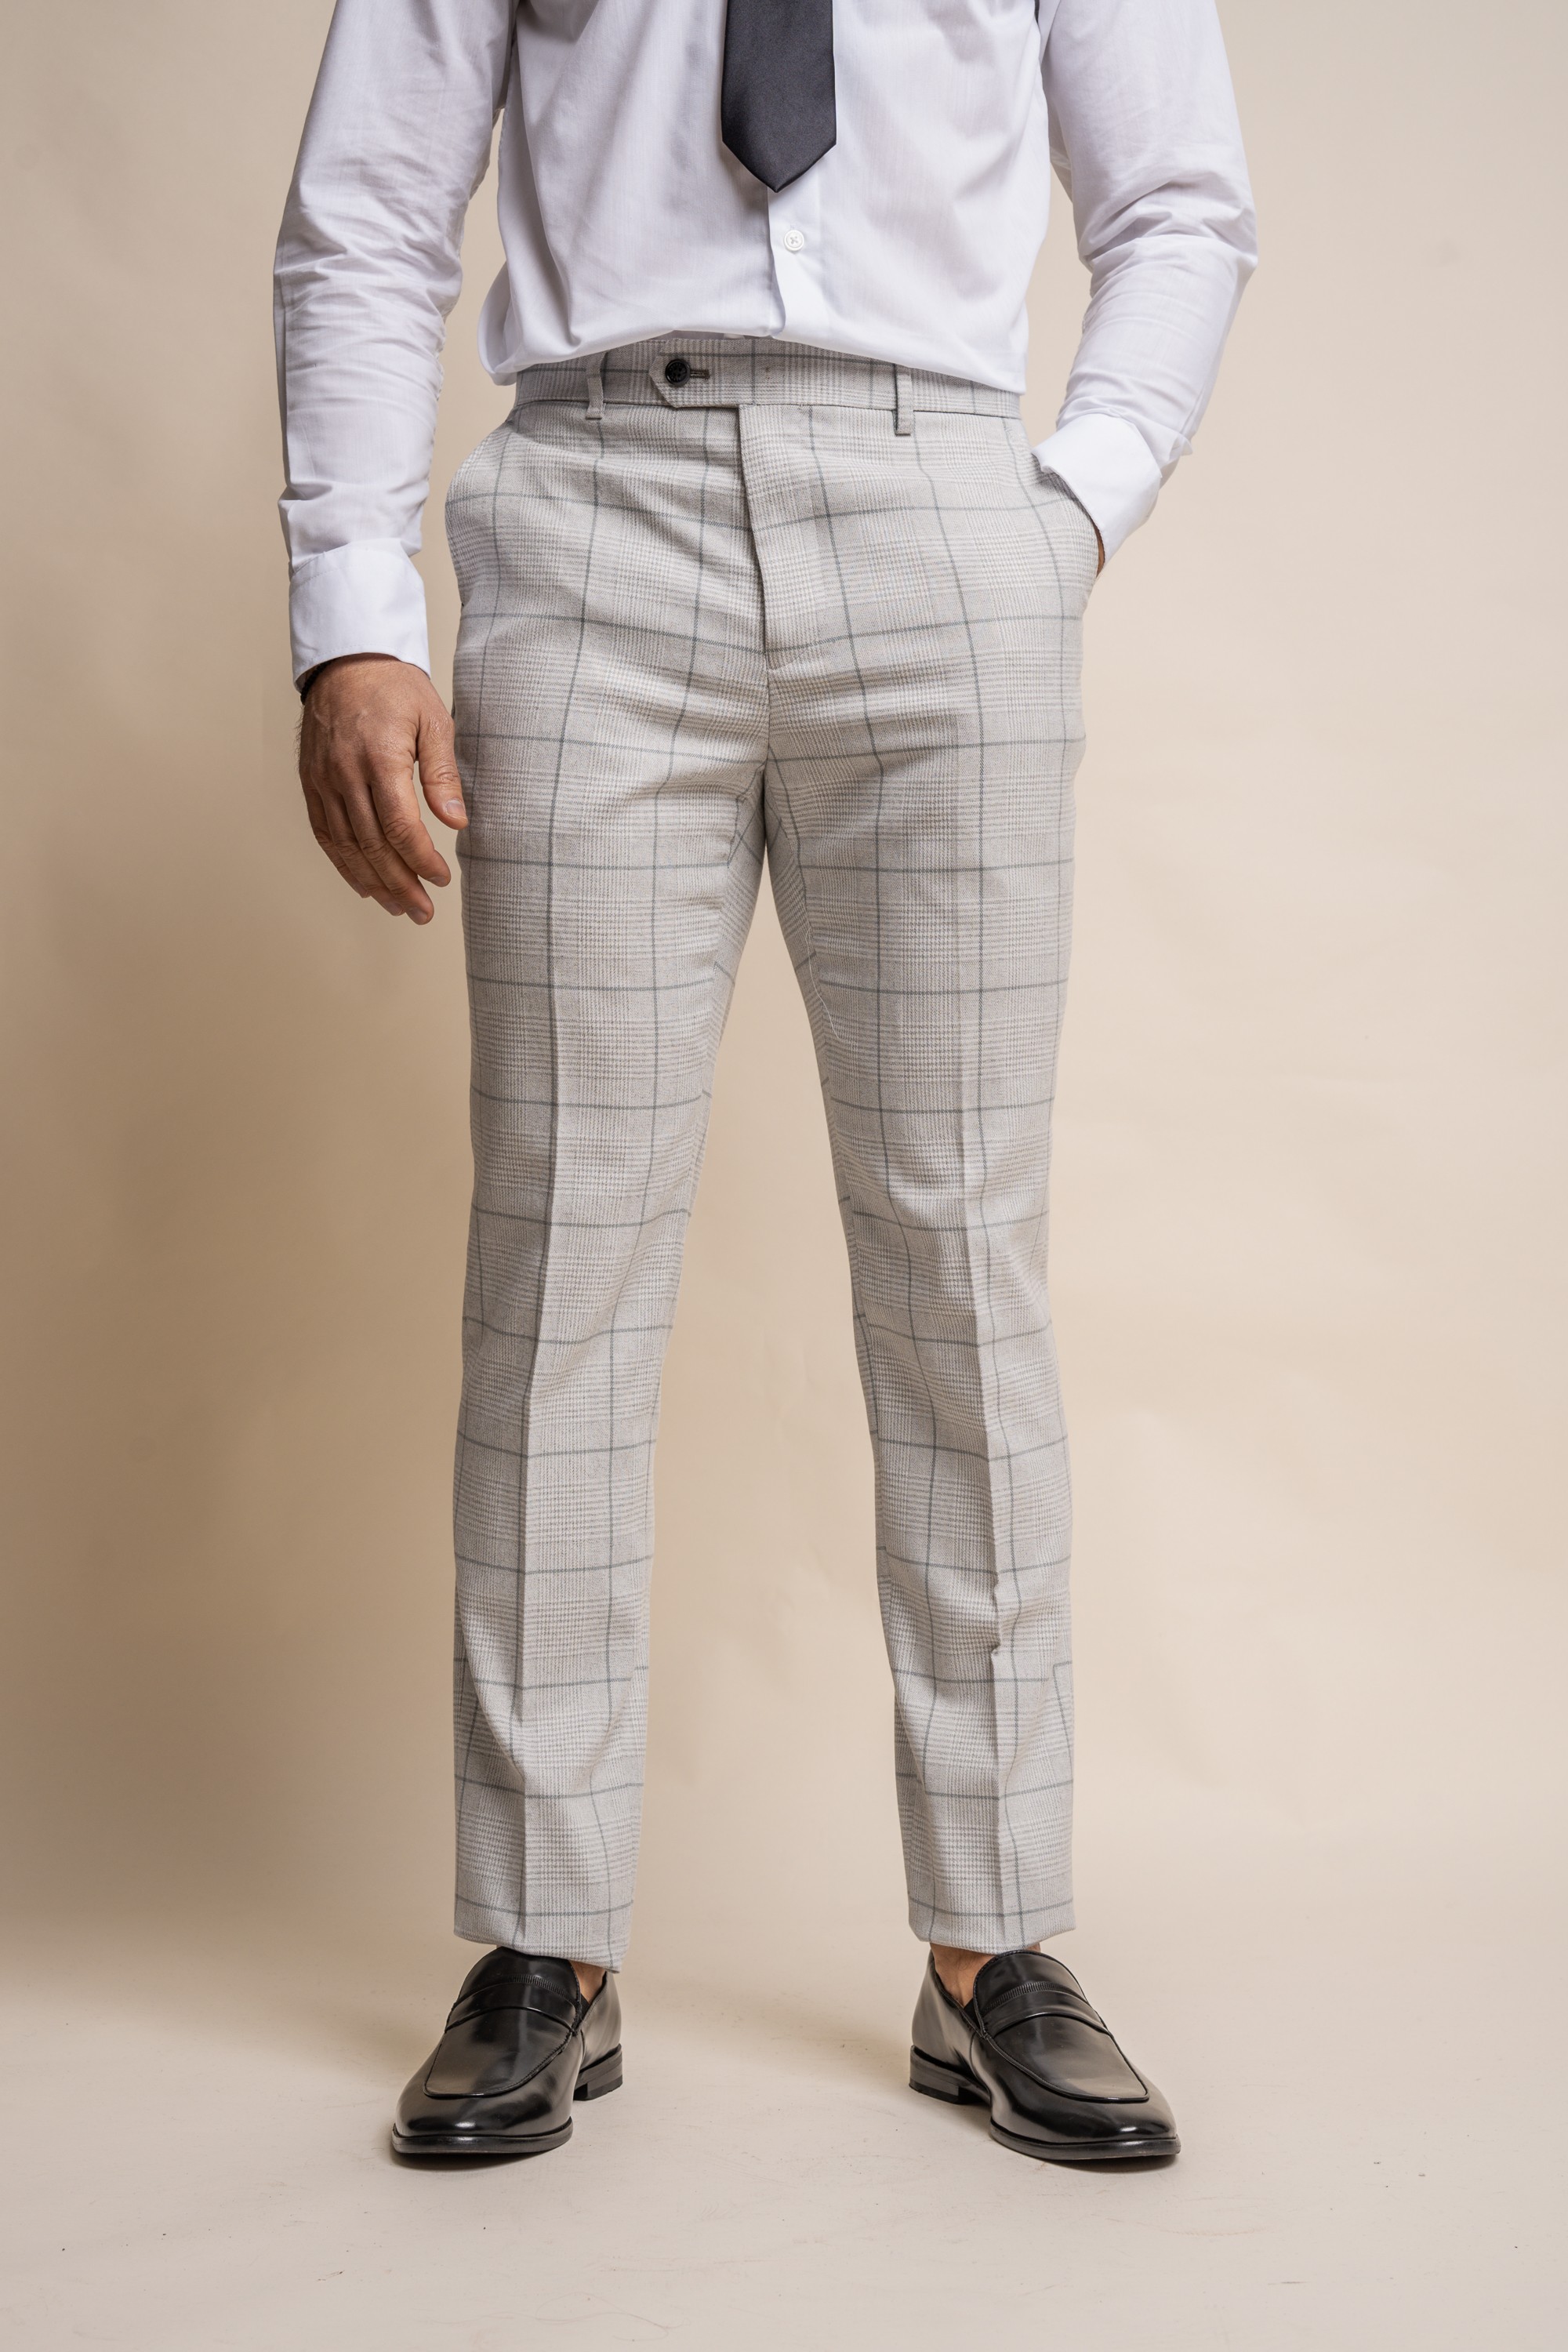 Buy Peter England Men Grey Check Carrot Fit Formal Trousers online